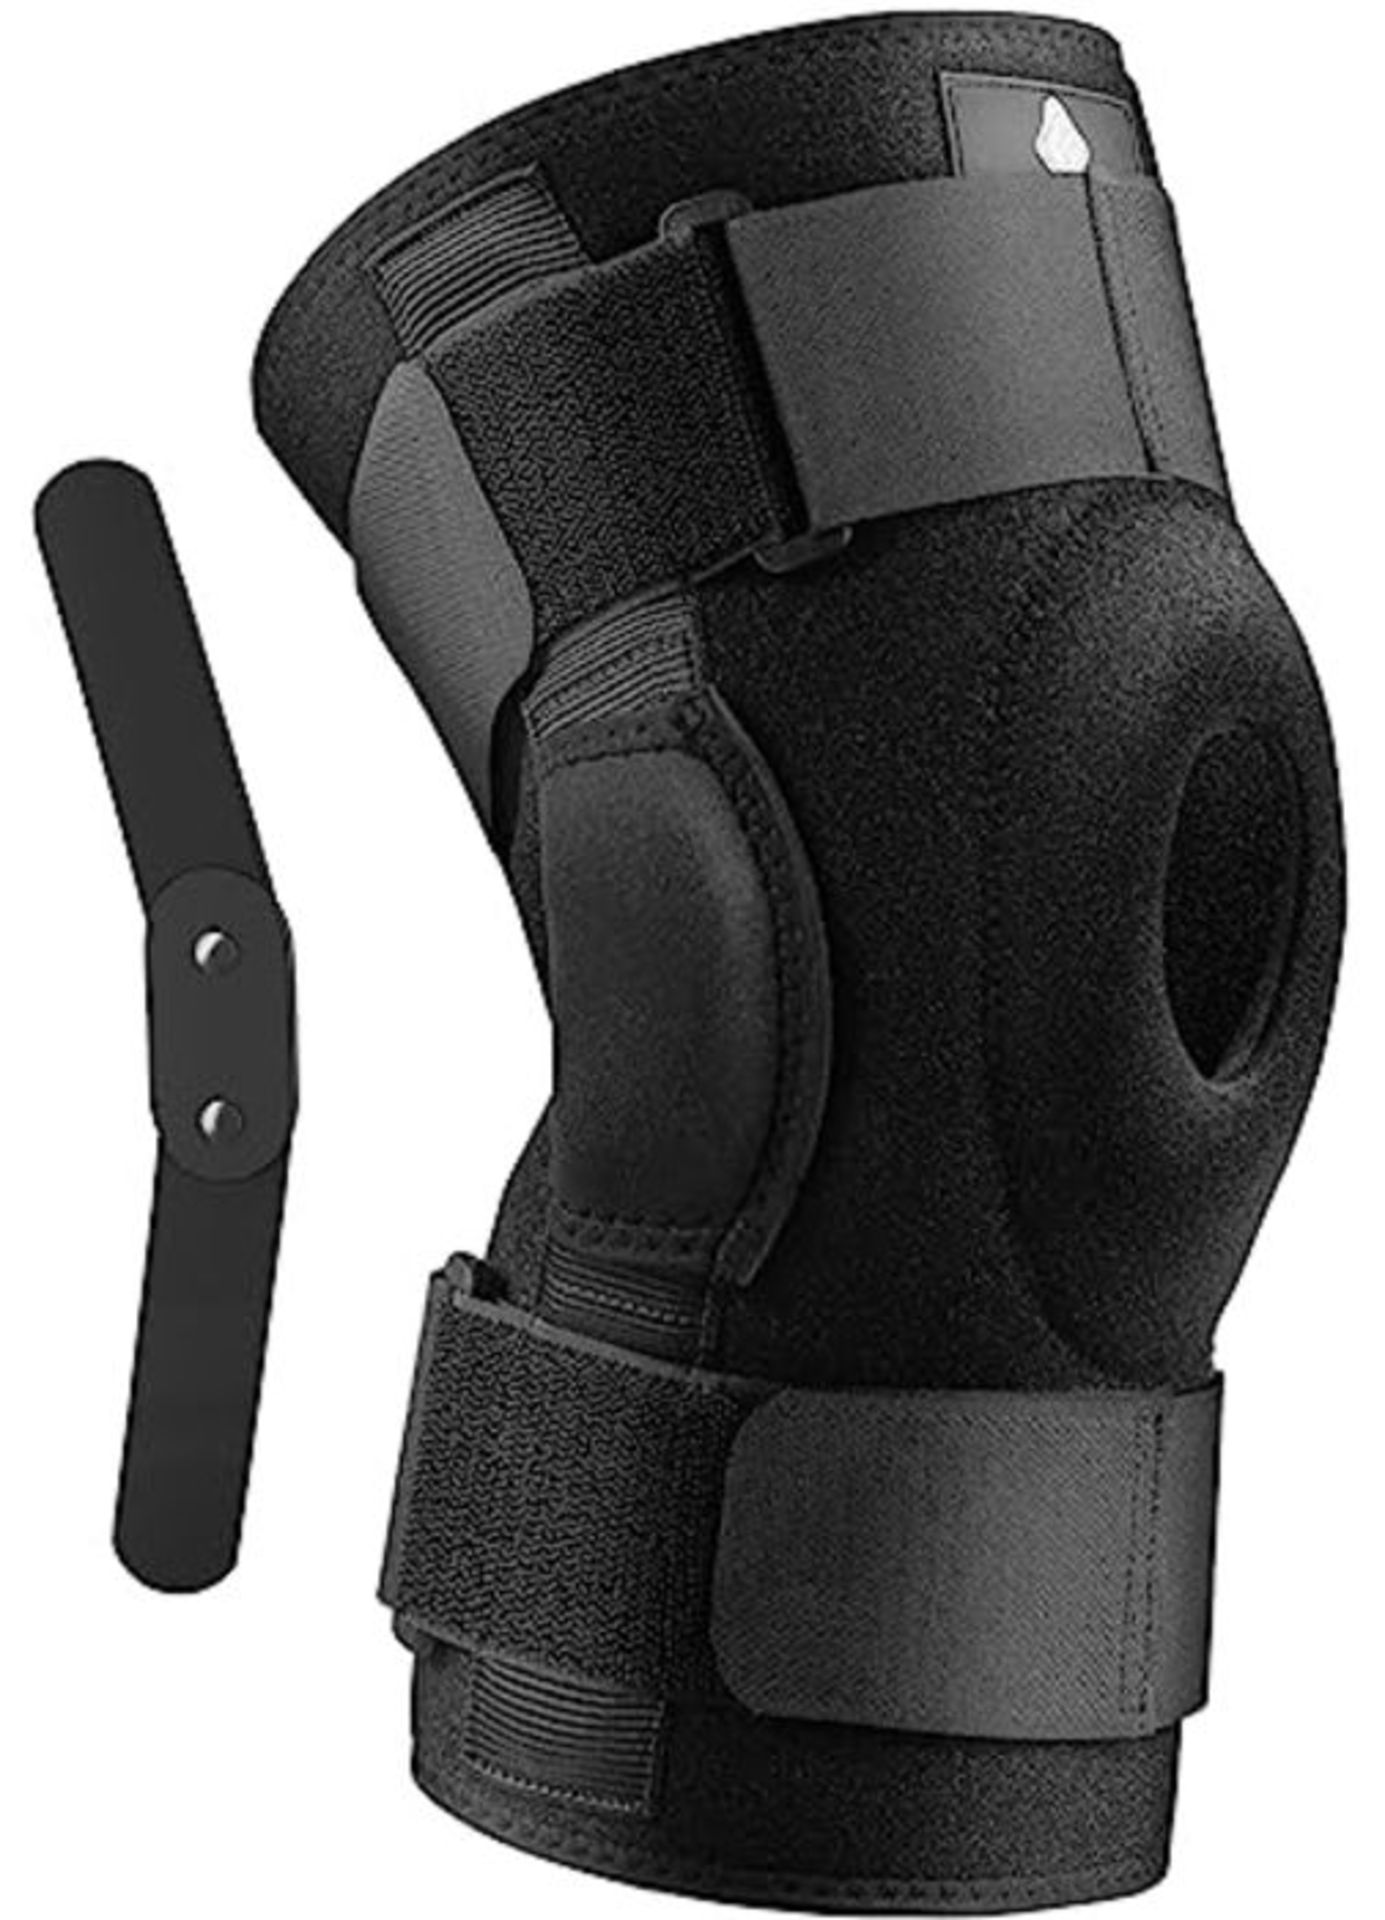 NEENCA Hinged Knee Brace Adjustable Knee Brace with Compression Knee Pack with Open Pa - Image 4 of 6